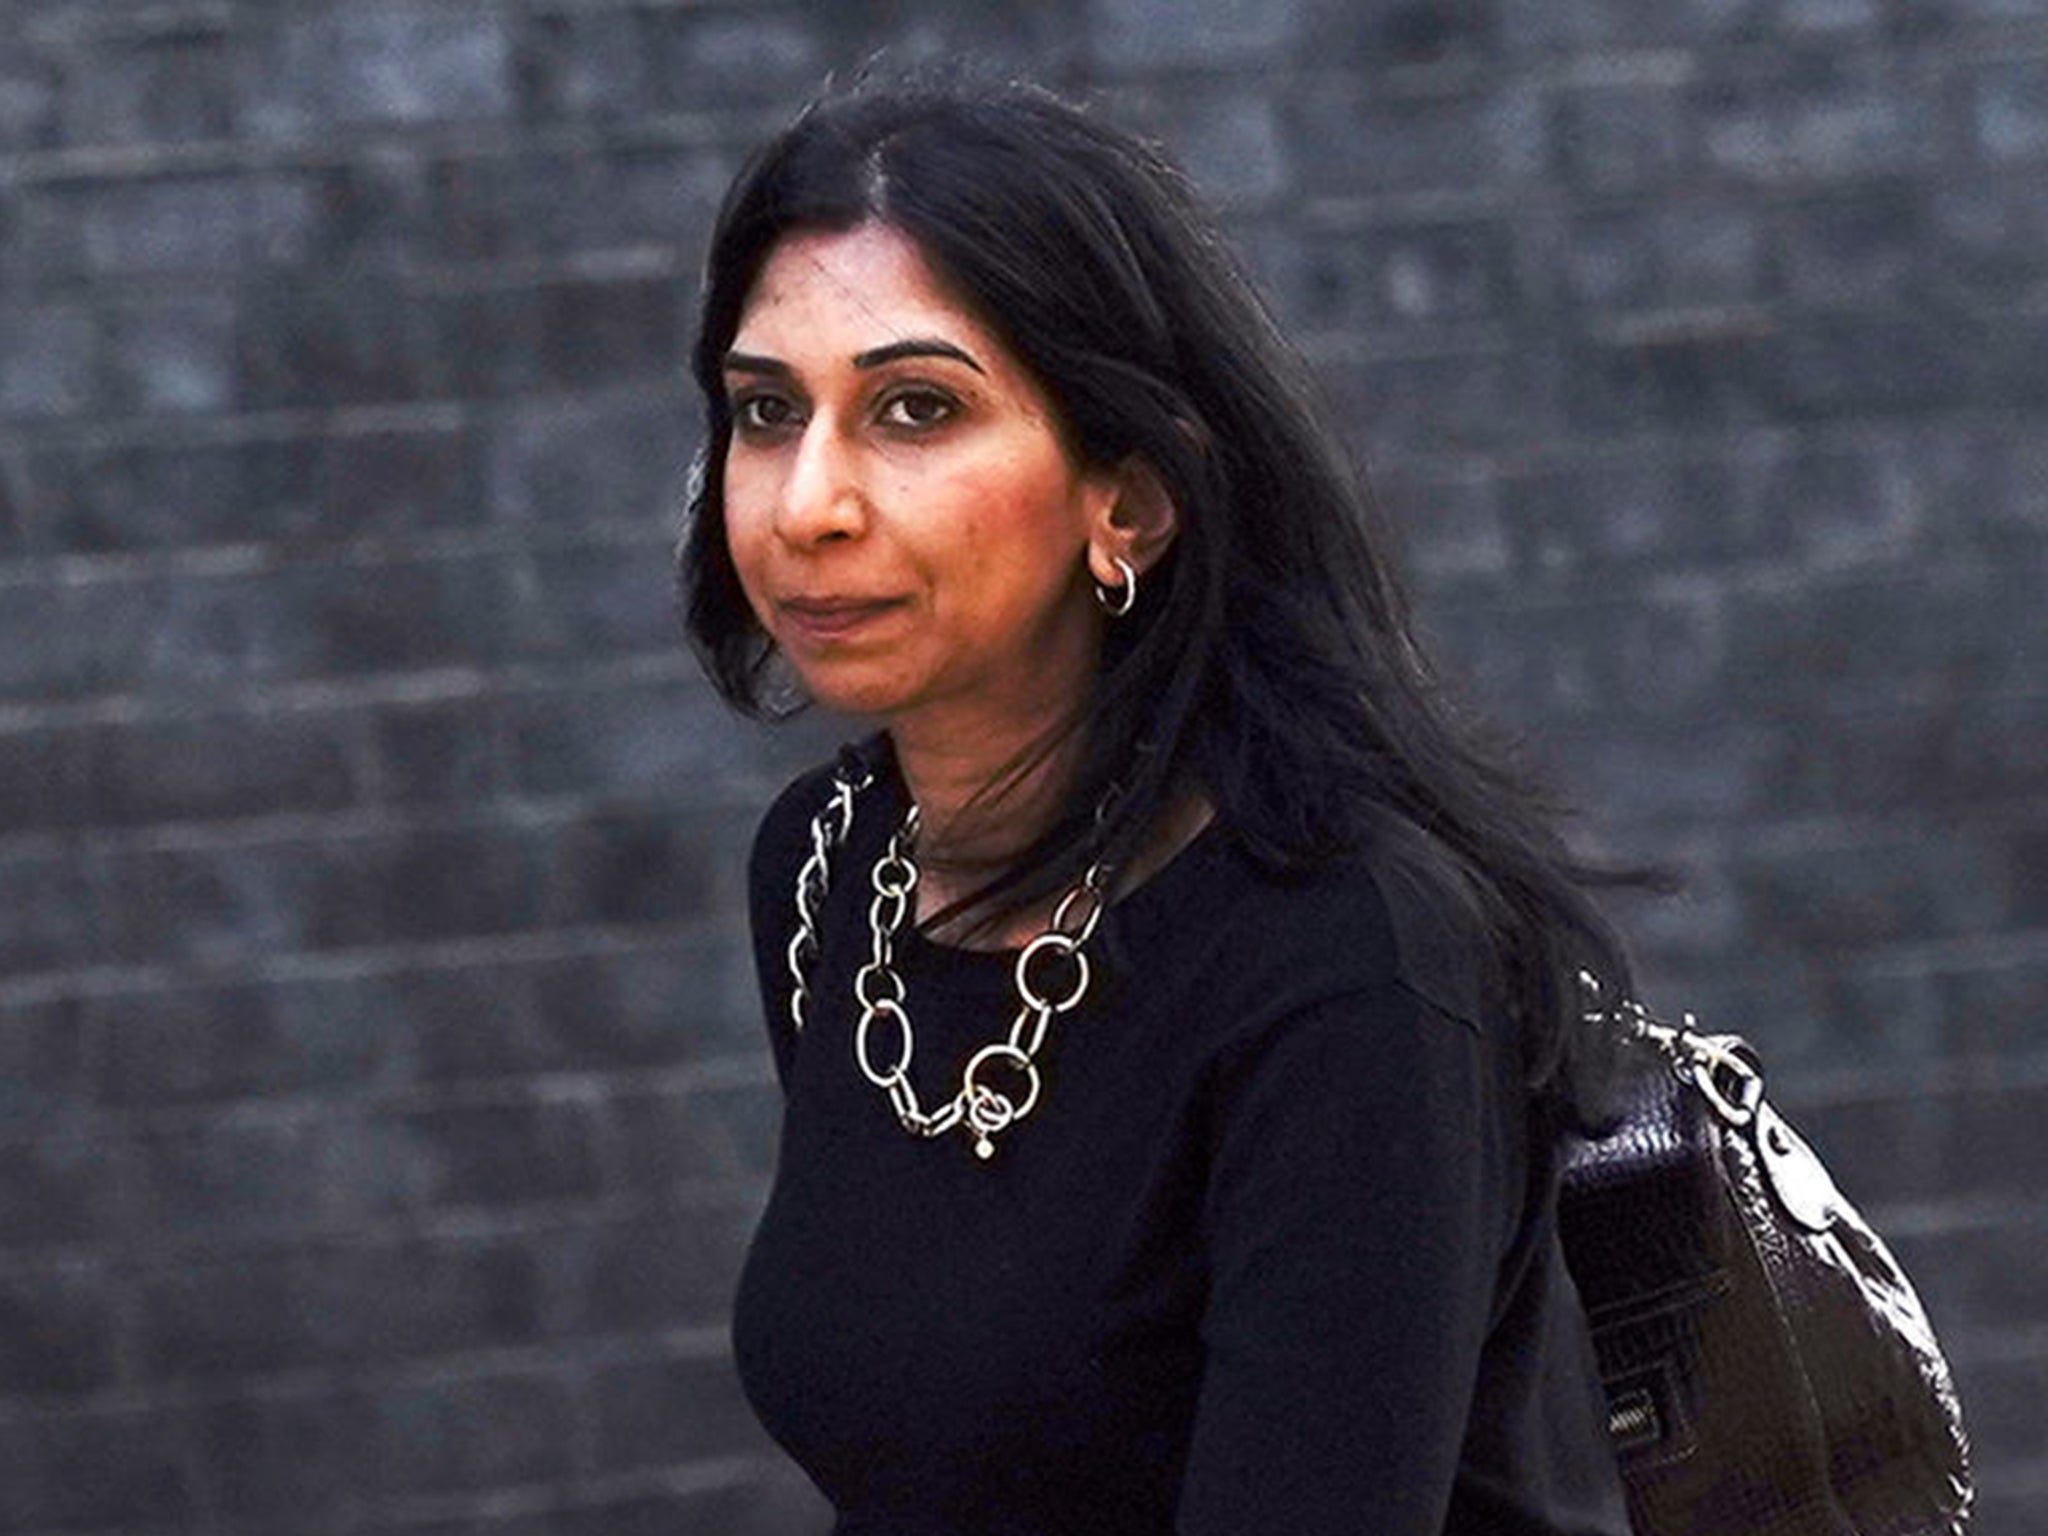 Suella Braverman is alleged to have asked staff to help her avoid getting speeding points on her driving licence